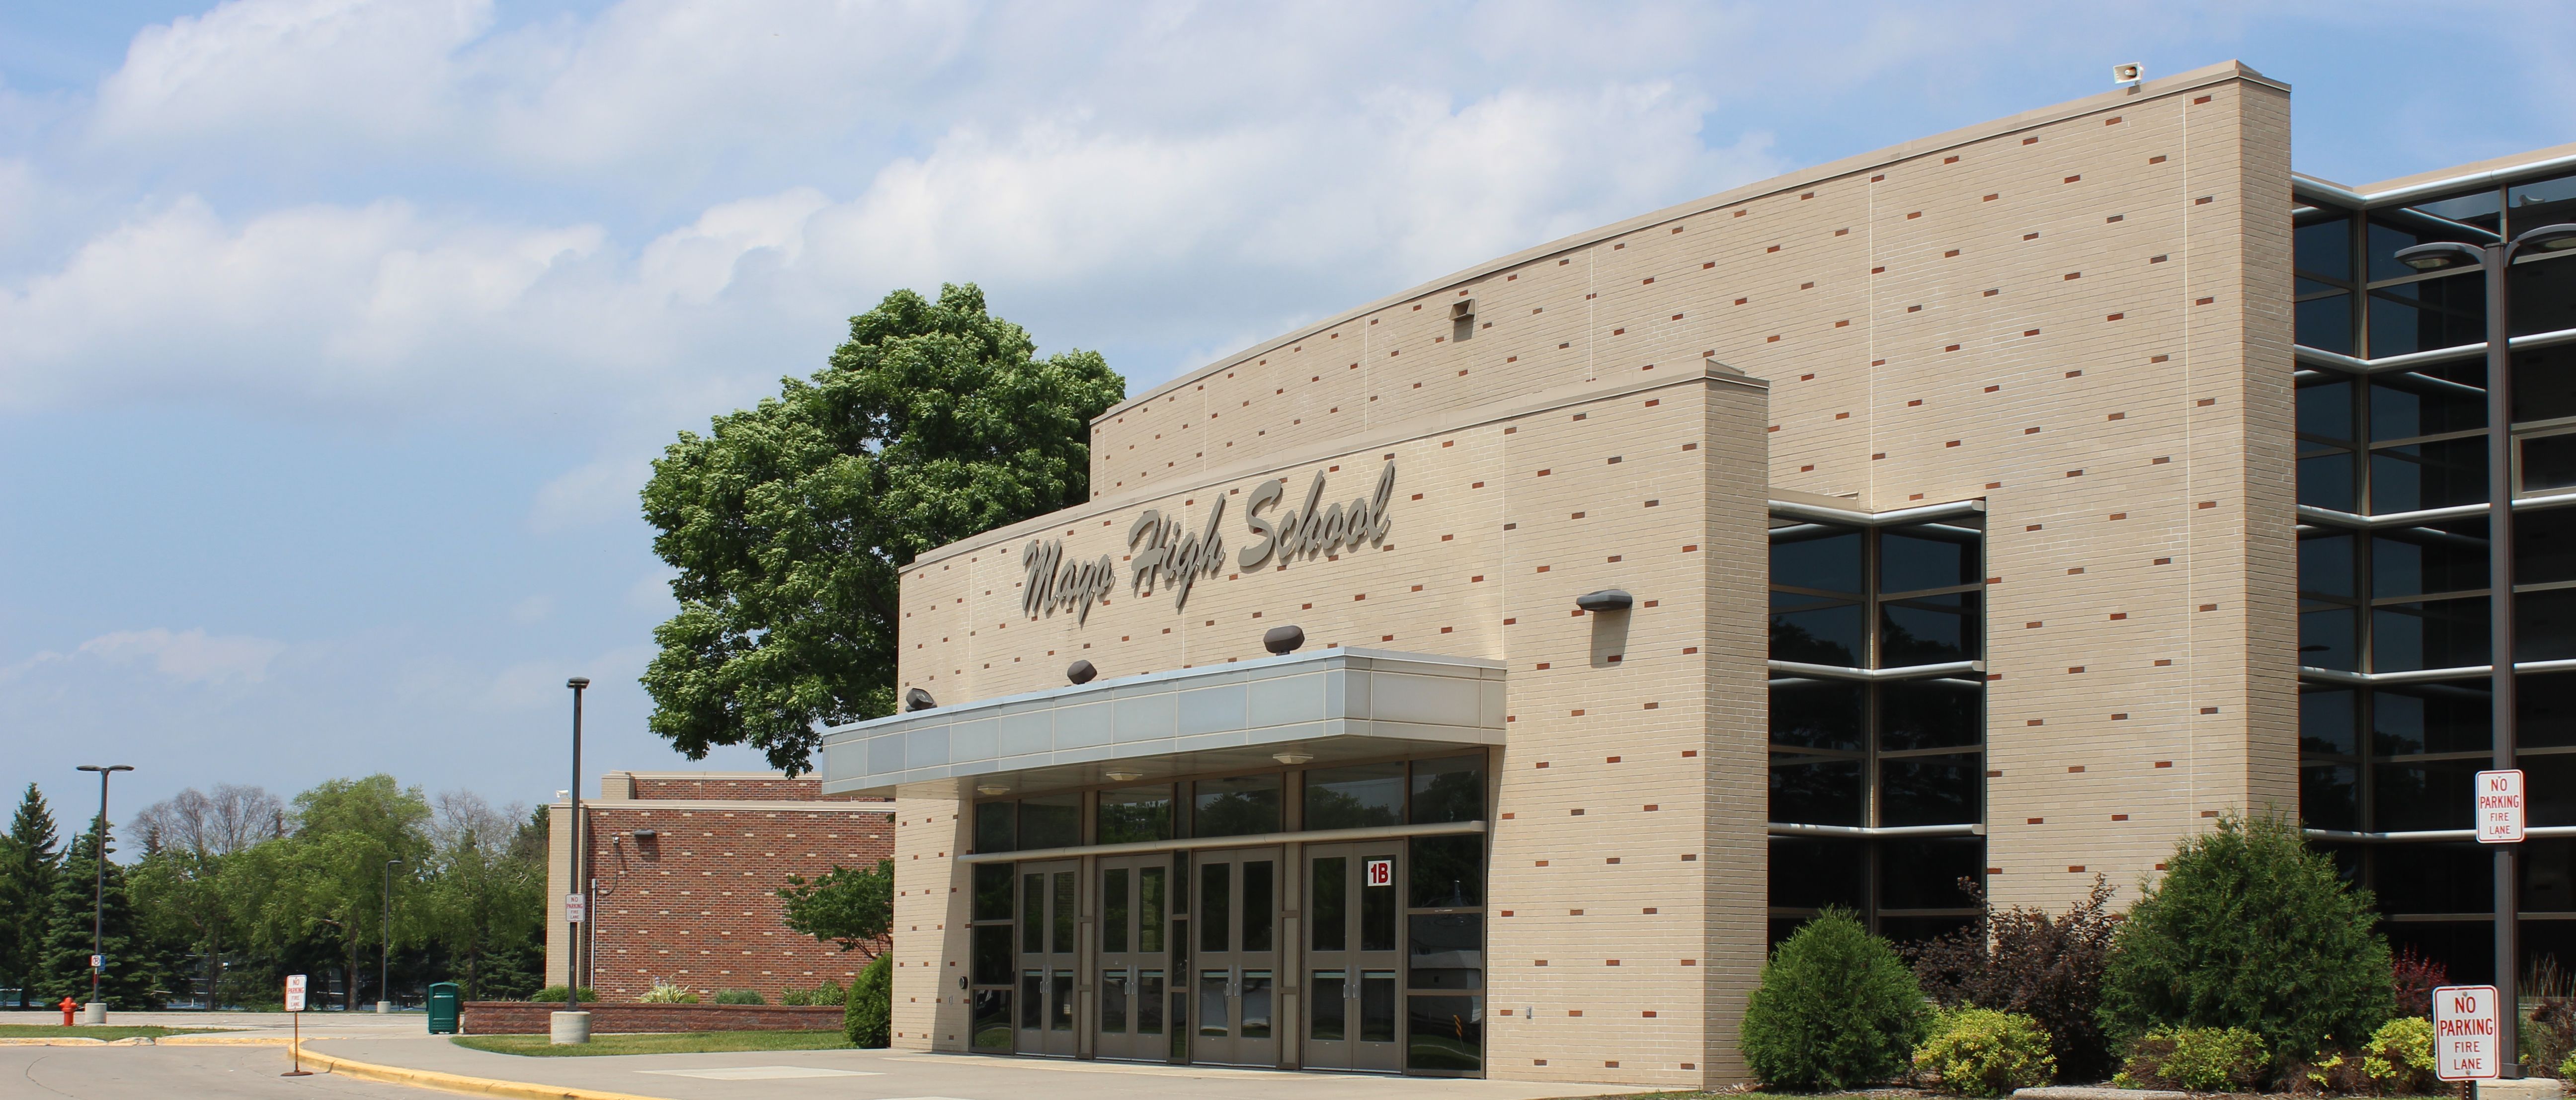 Image of Mayo High School event entrance